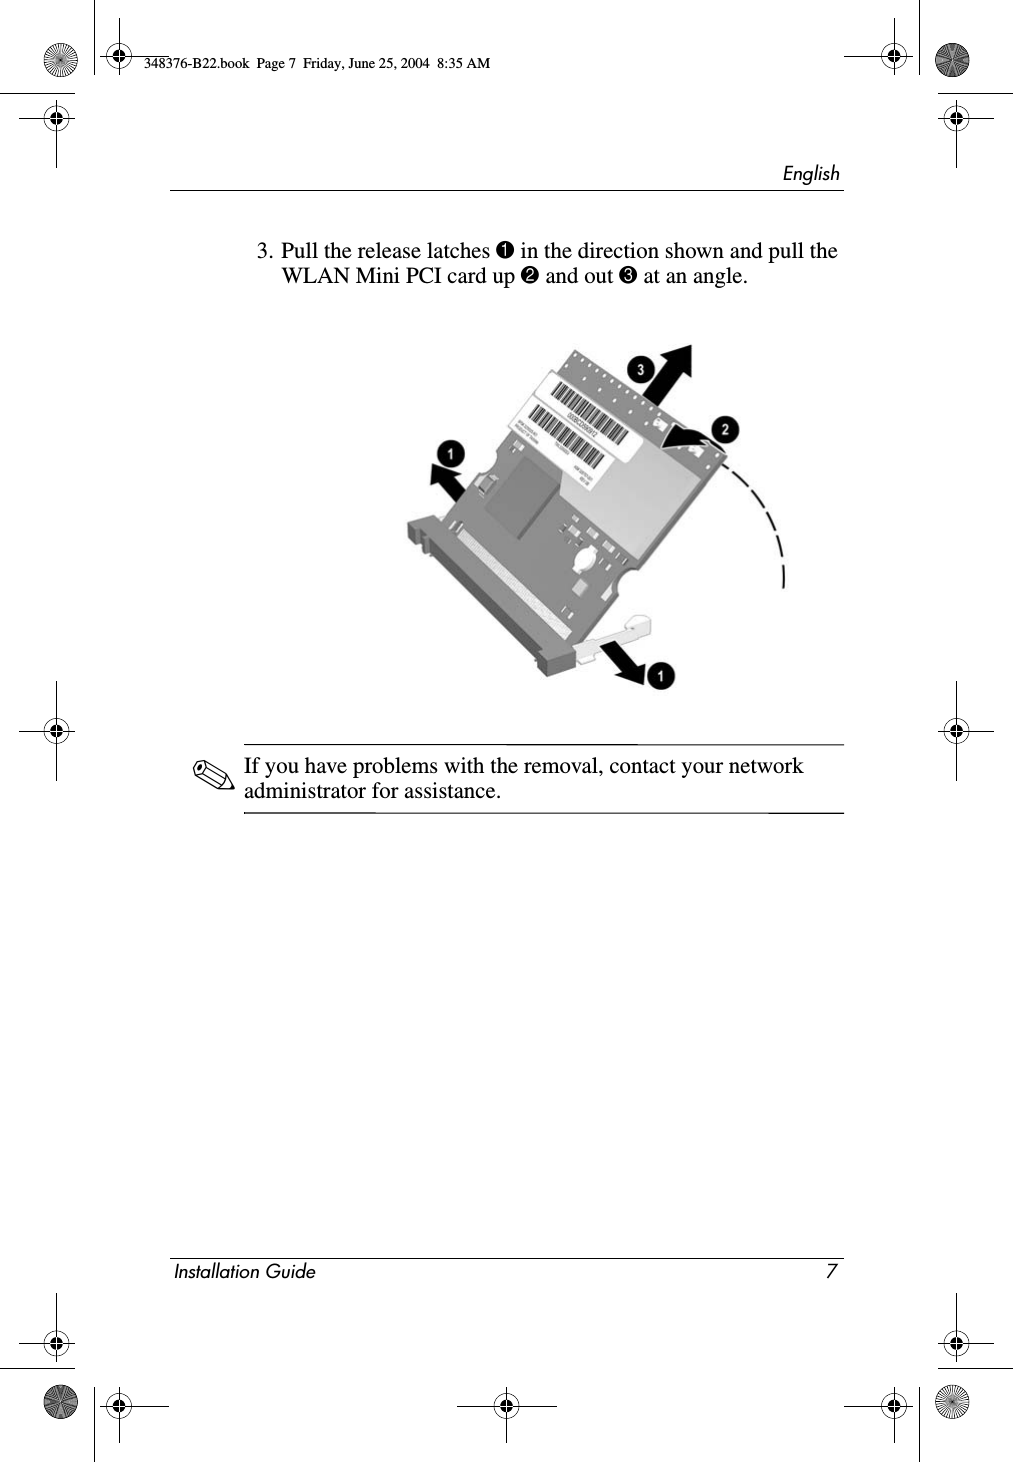 EnglishInstallation Guide 73. Pull the release latches 1 in the direction shown and pull the WLAN Mini PCI card up 2 and out 3 at an angle.✎If you have problems with the removal, contact your network administrator for assistance.348376-B22.book  Page 7  Friday, June 25, 2004  8:35 AM